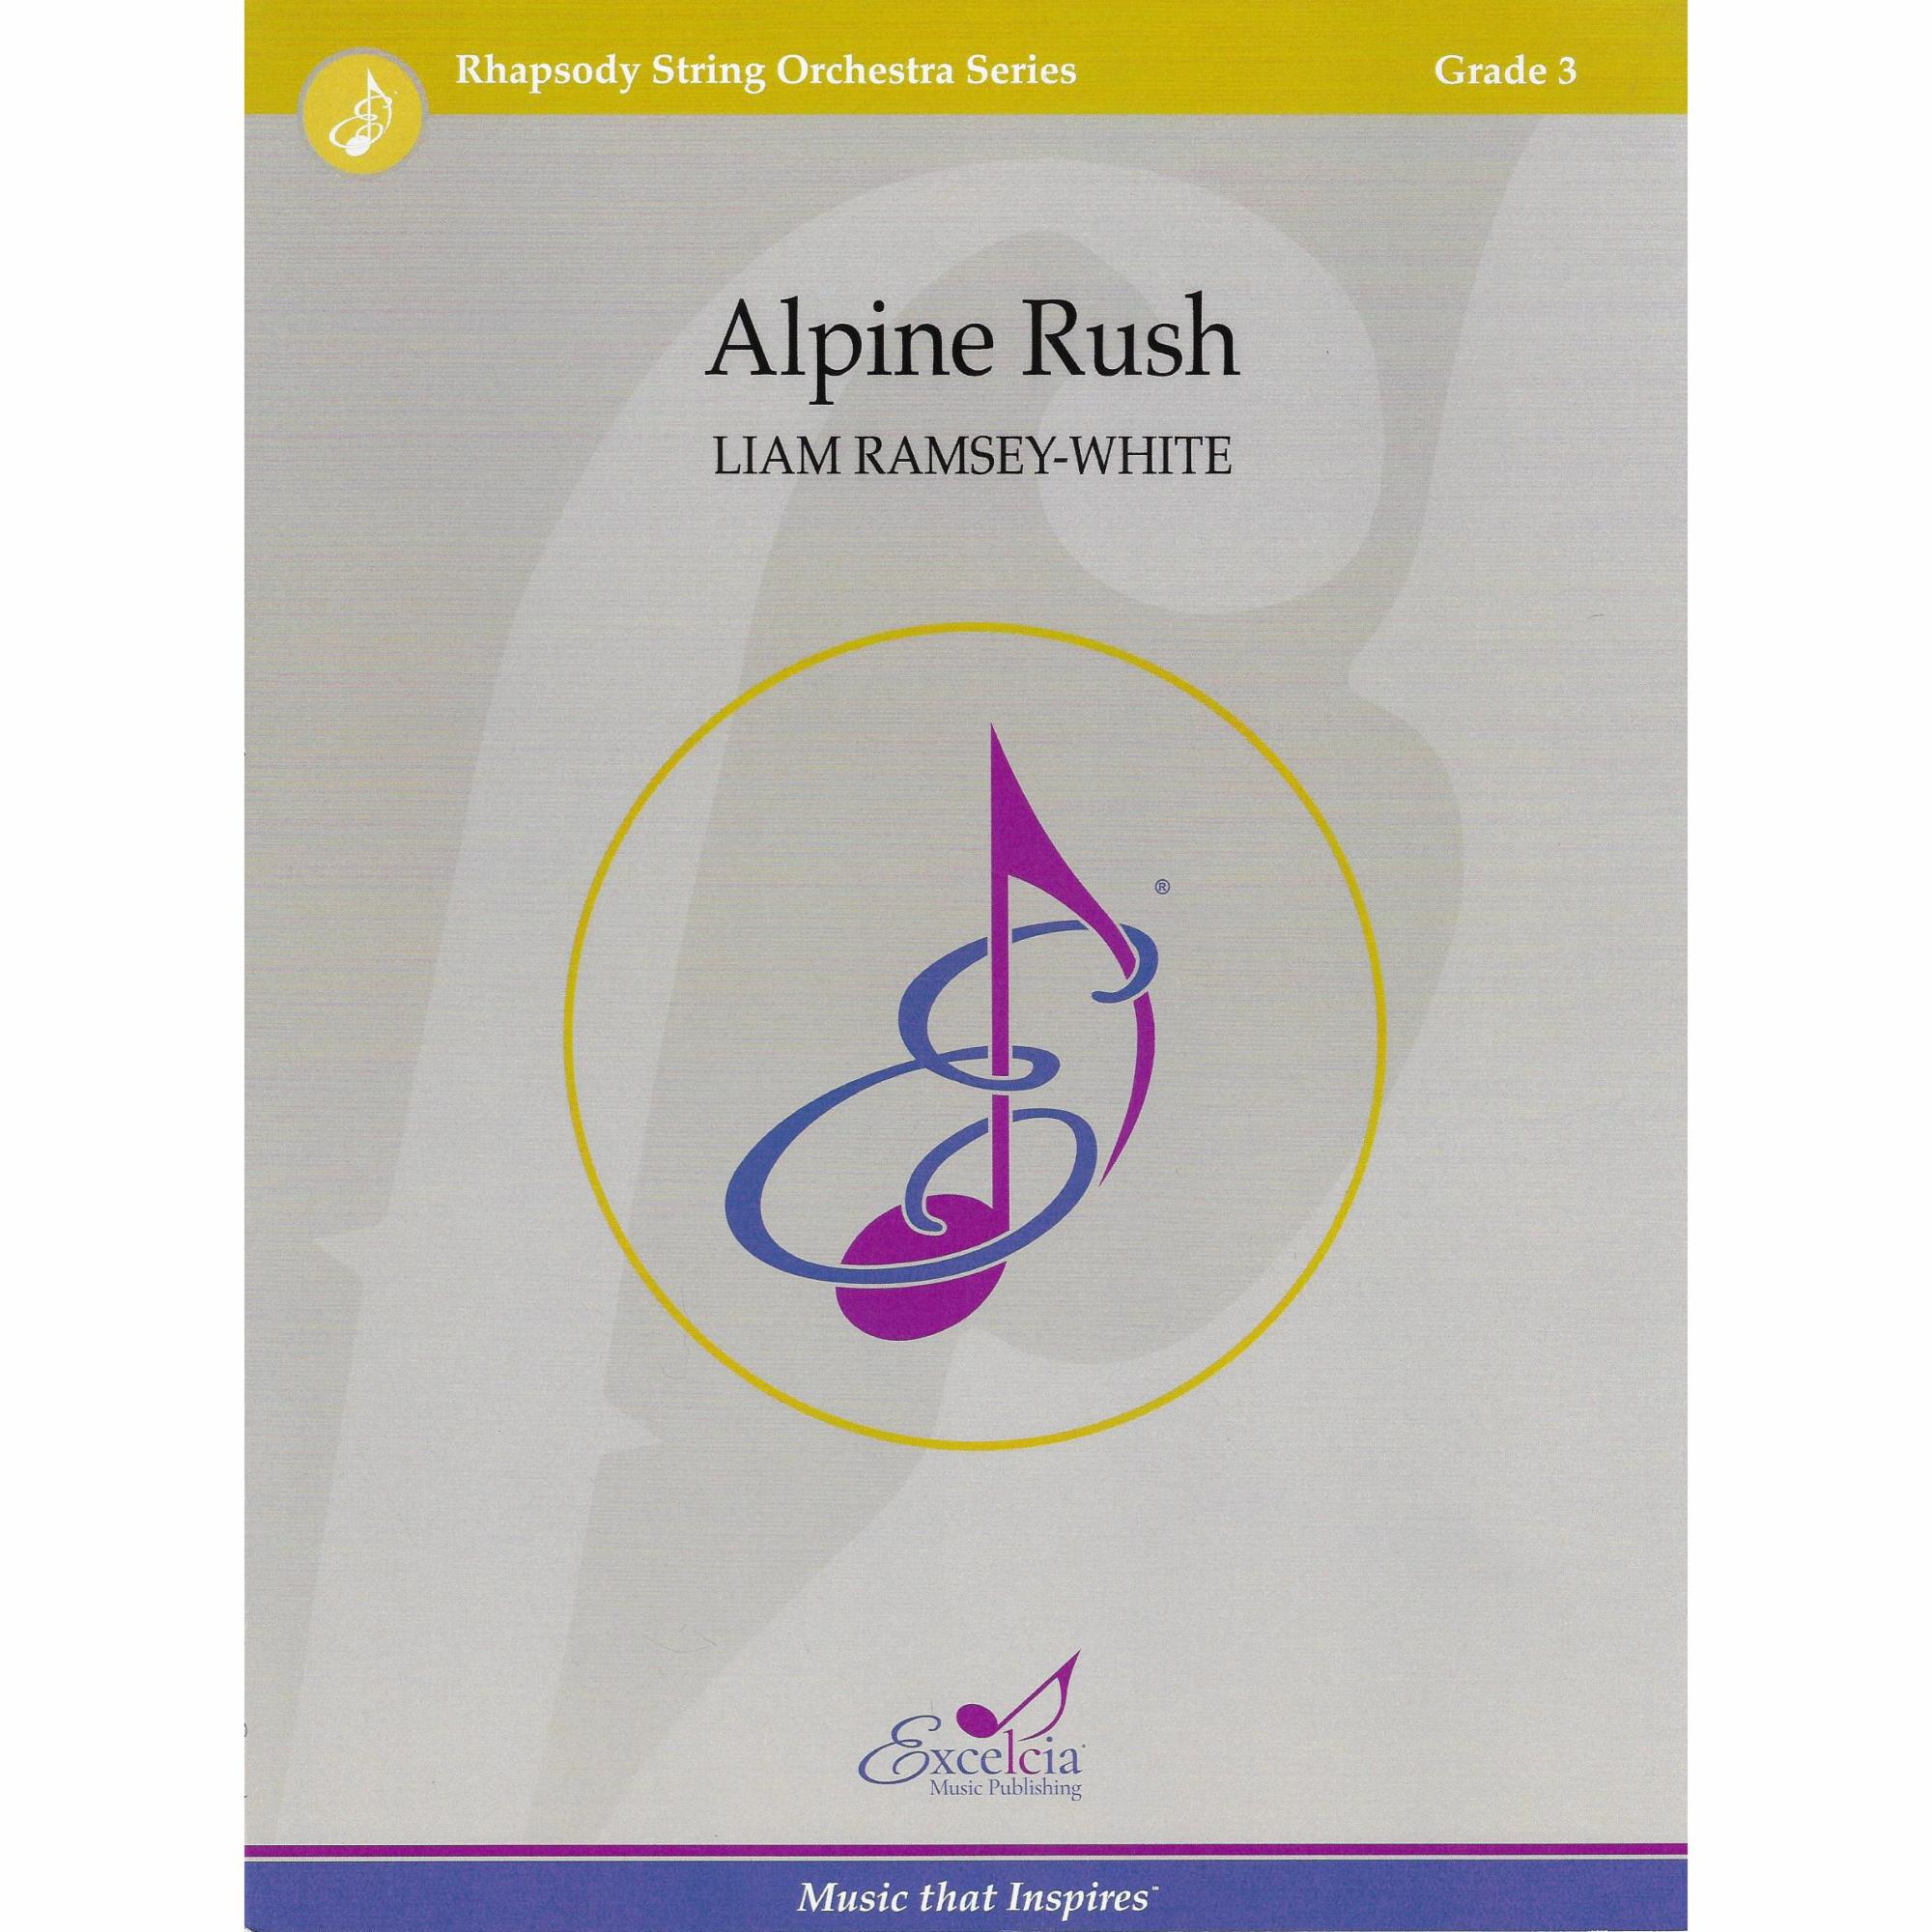 Alpine Rush for String Orchestra